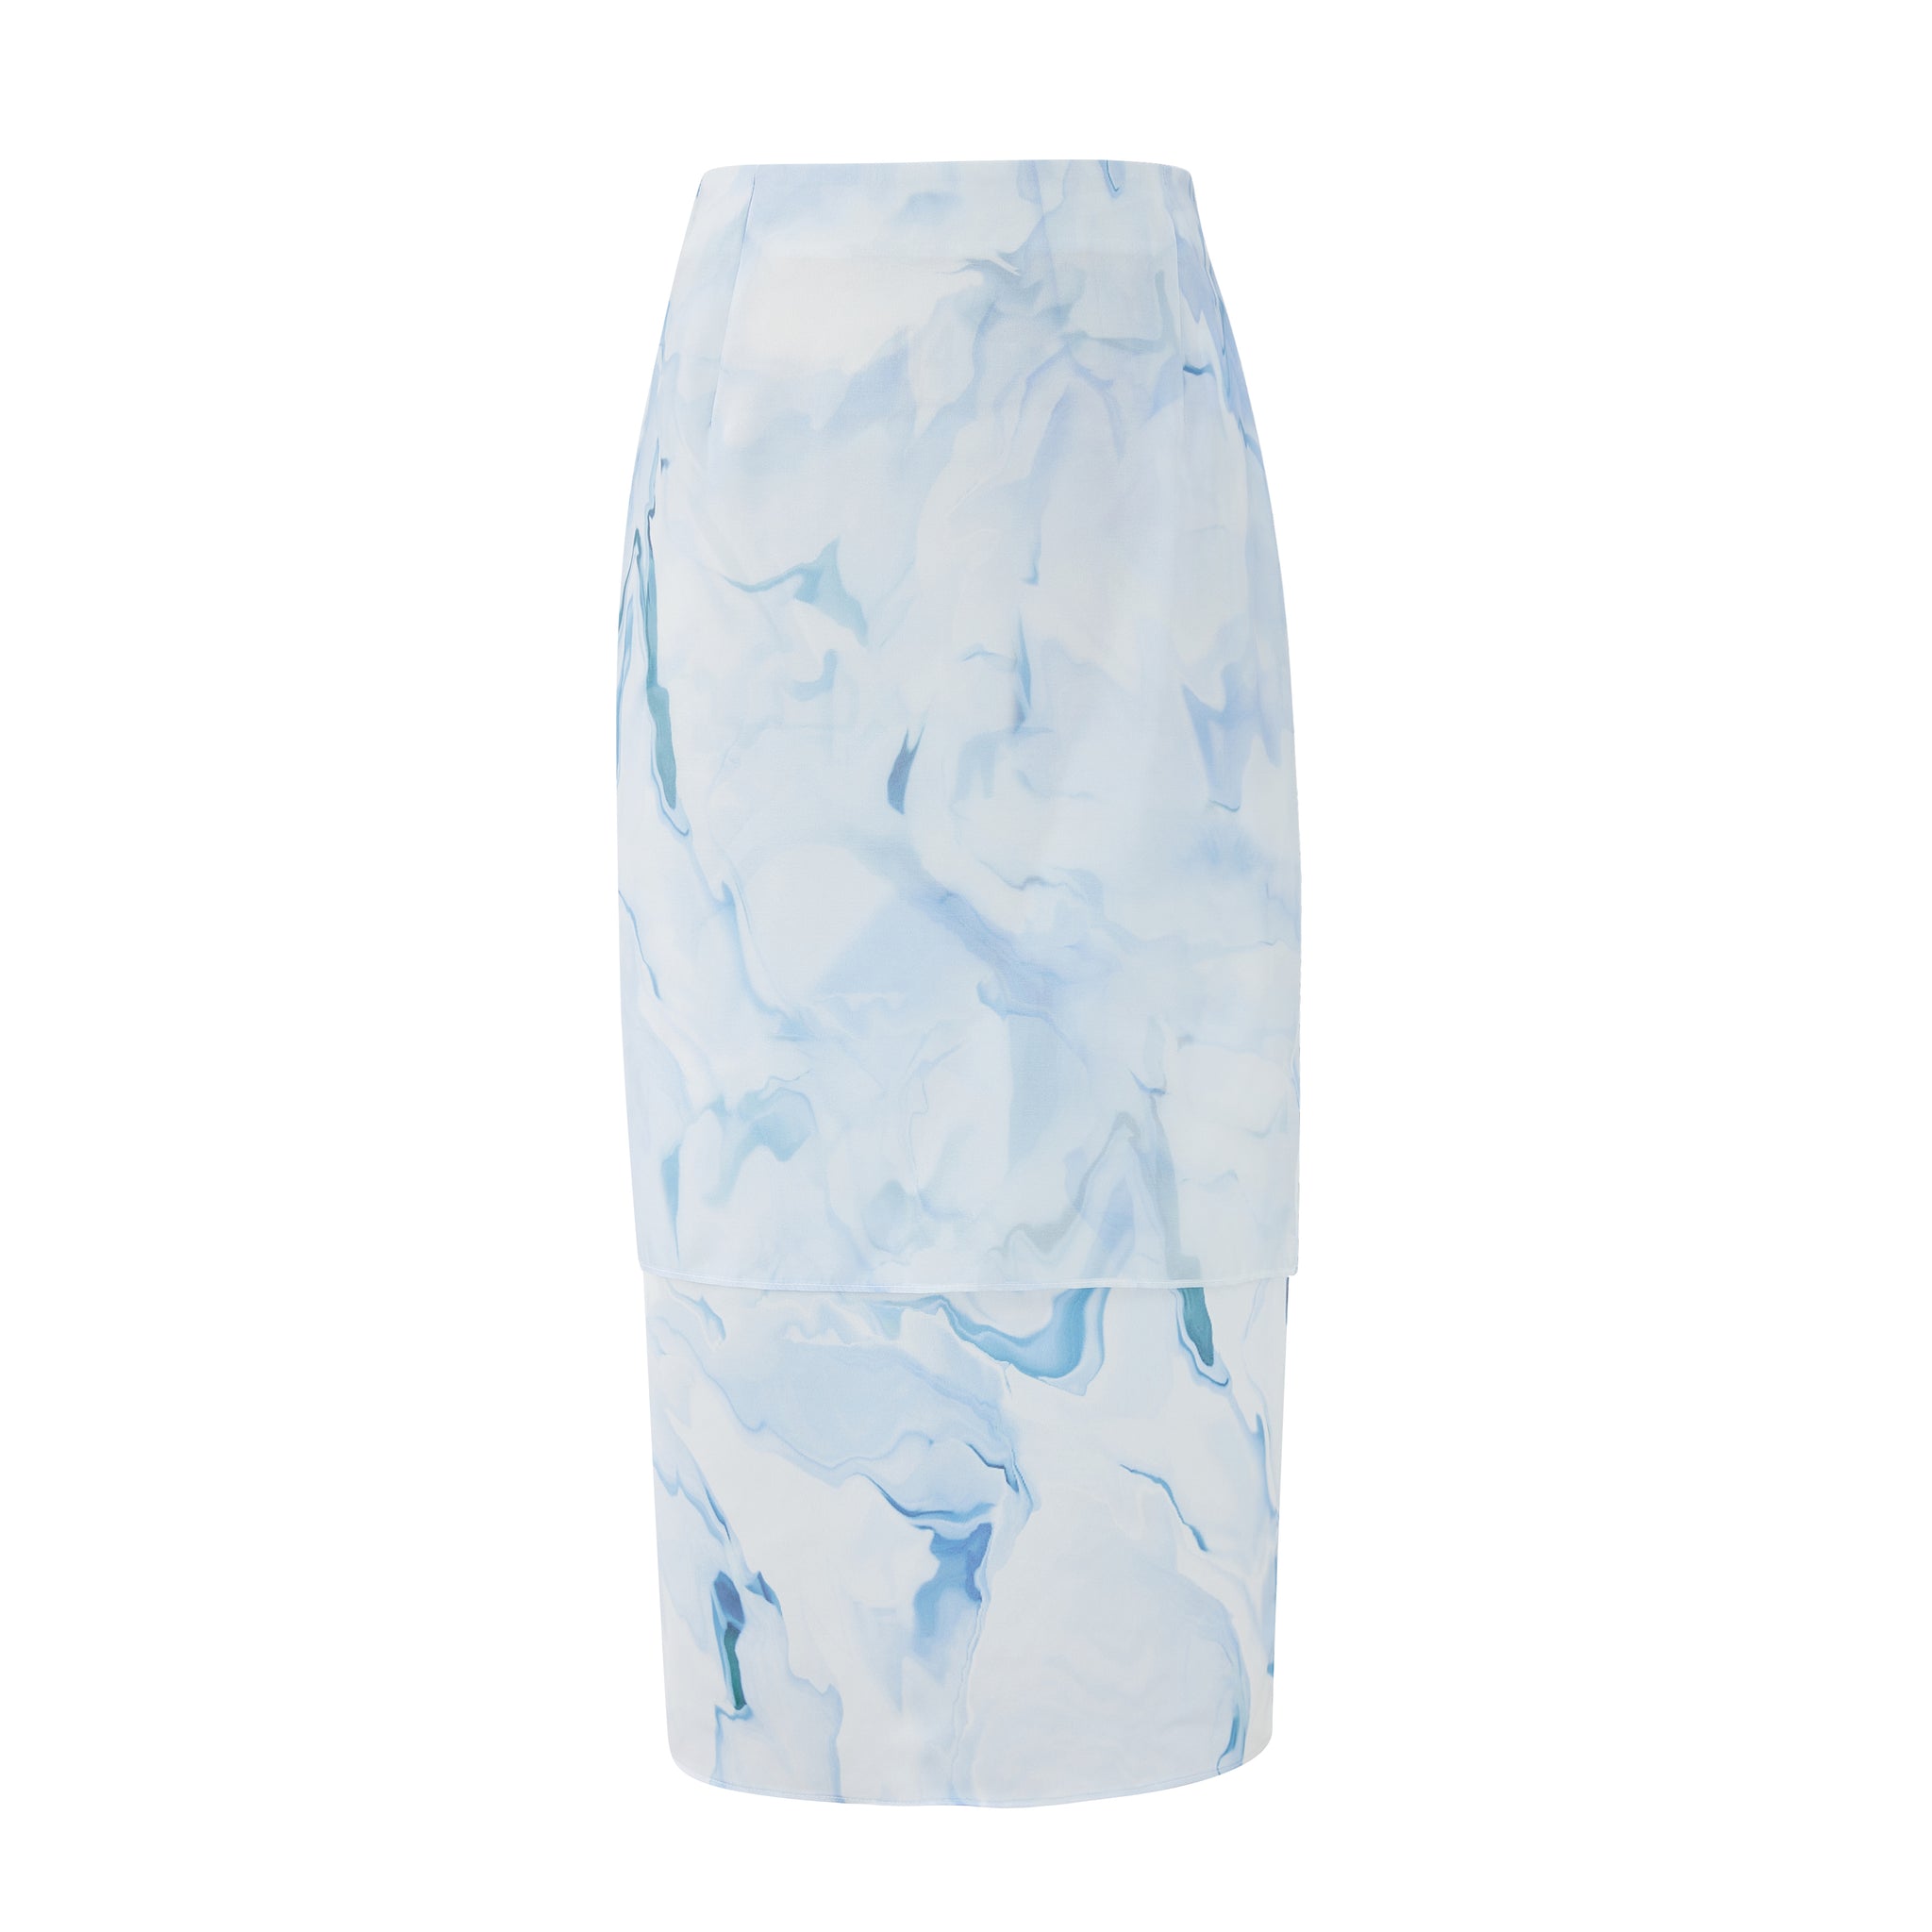 Blue Water Ripple Double Reflection Skirt